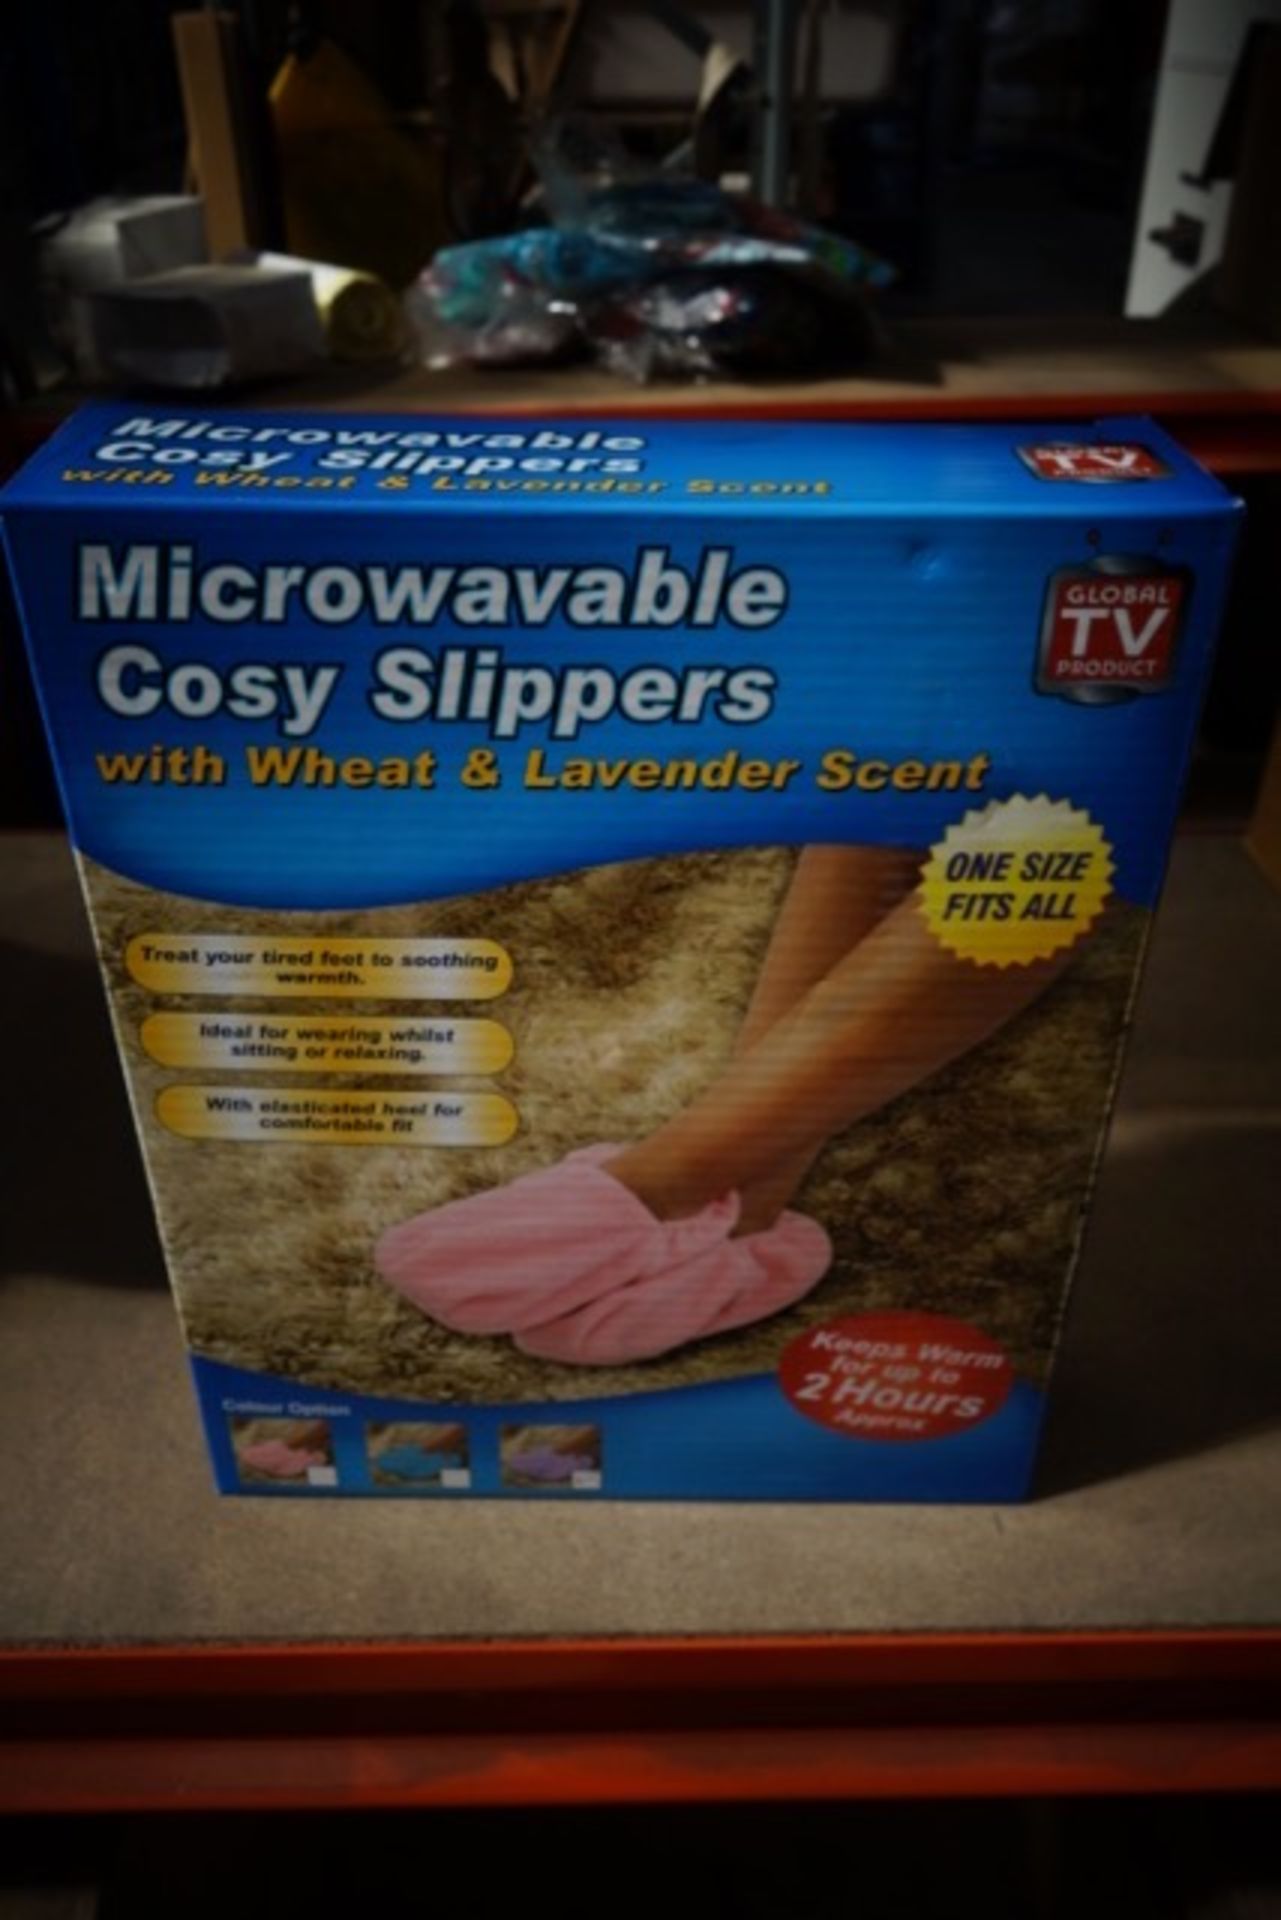 36 x Brand New Microwavable Cosy Slippers with Wheat & Lavender Scent